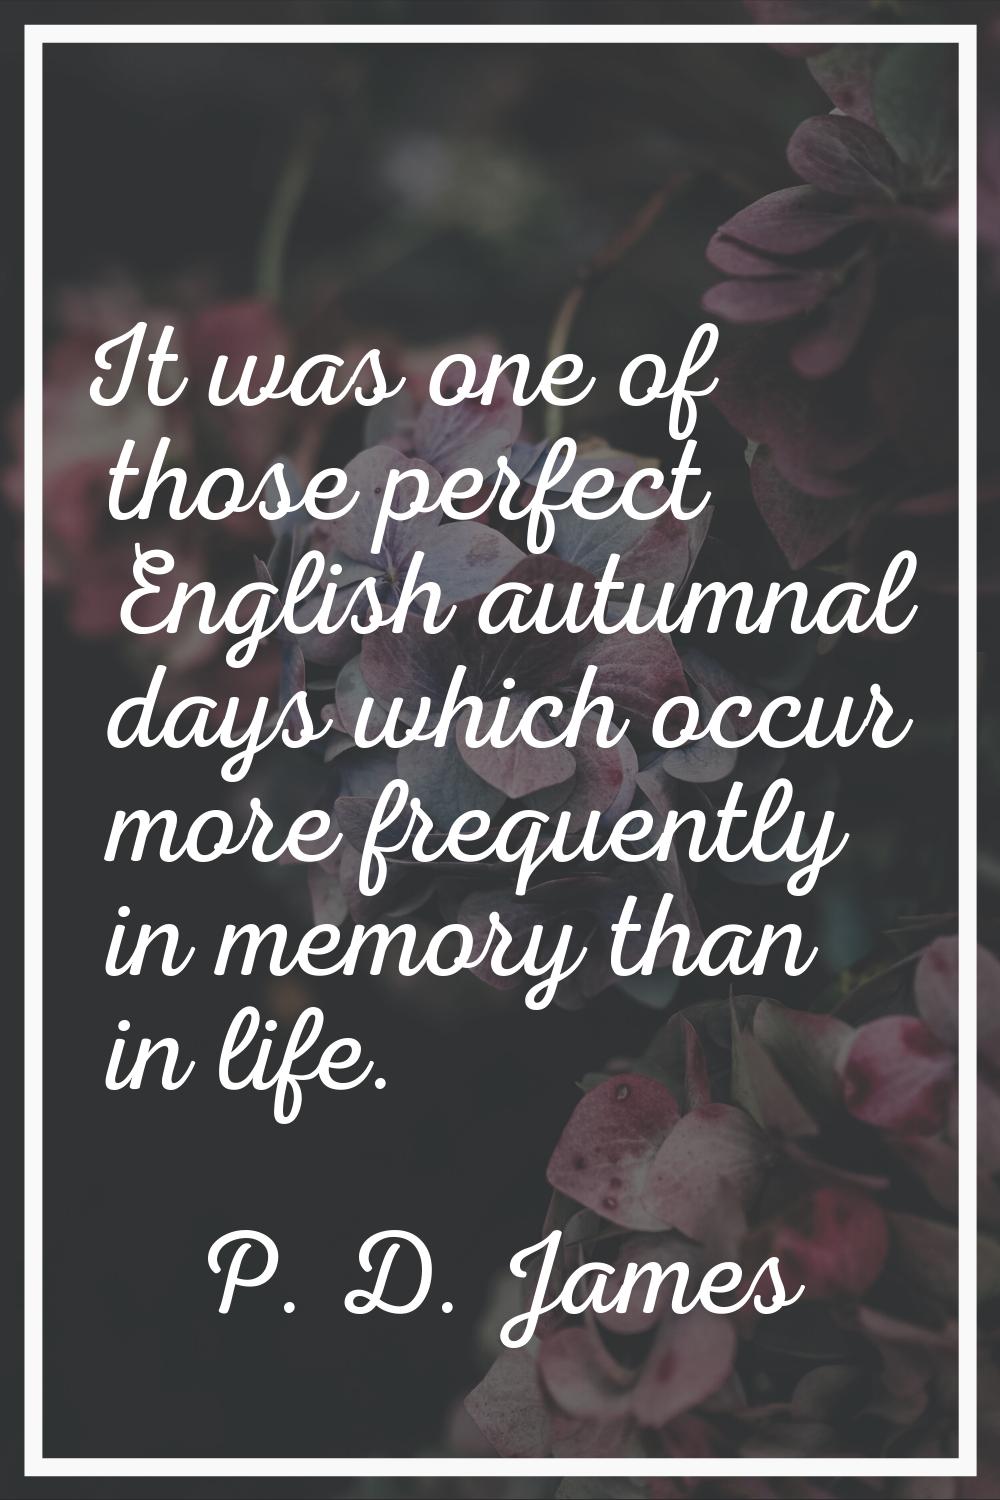 It was one of those perfect English autumnal days which occur more frequently in memory than in lif